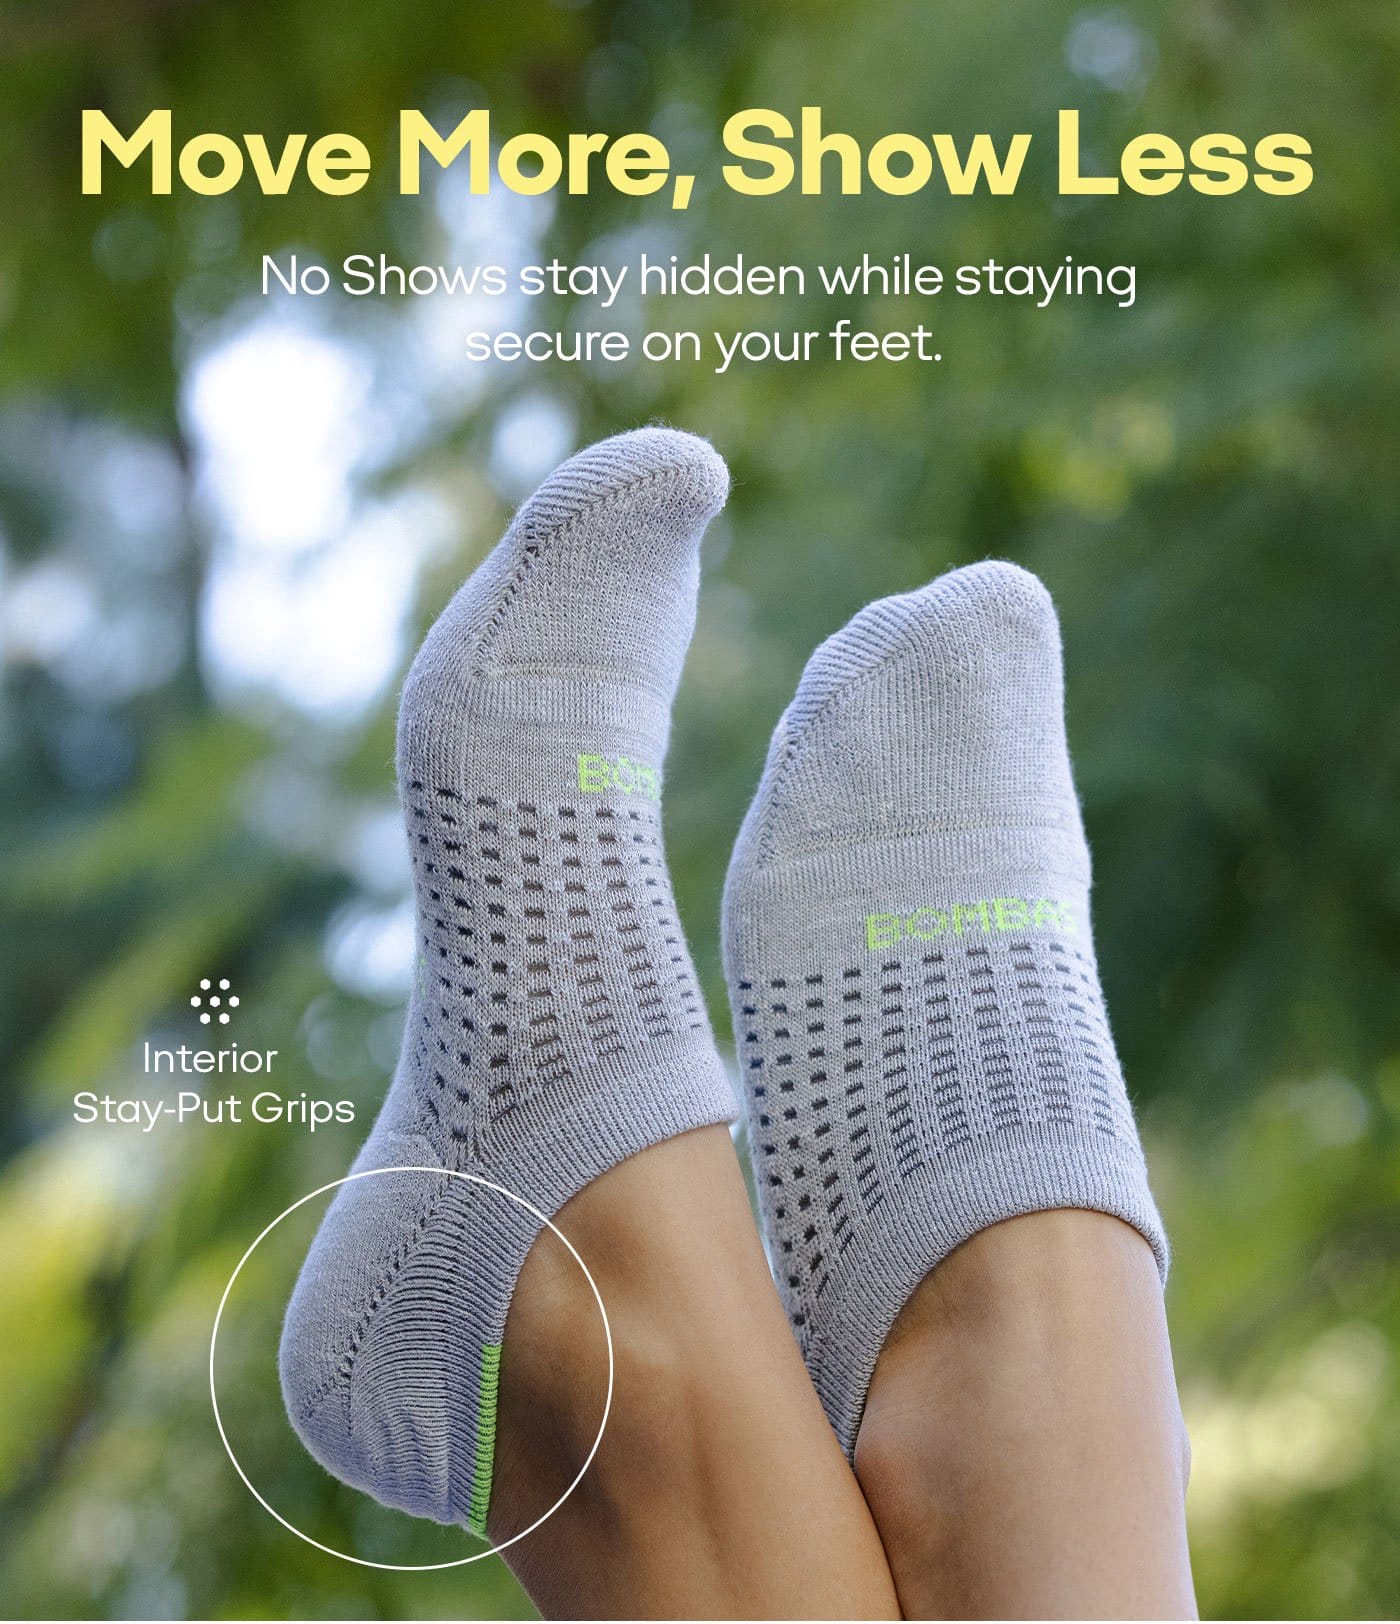 Move More, Show Less | No Shows stay hidden while staying secure on your feet.